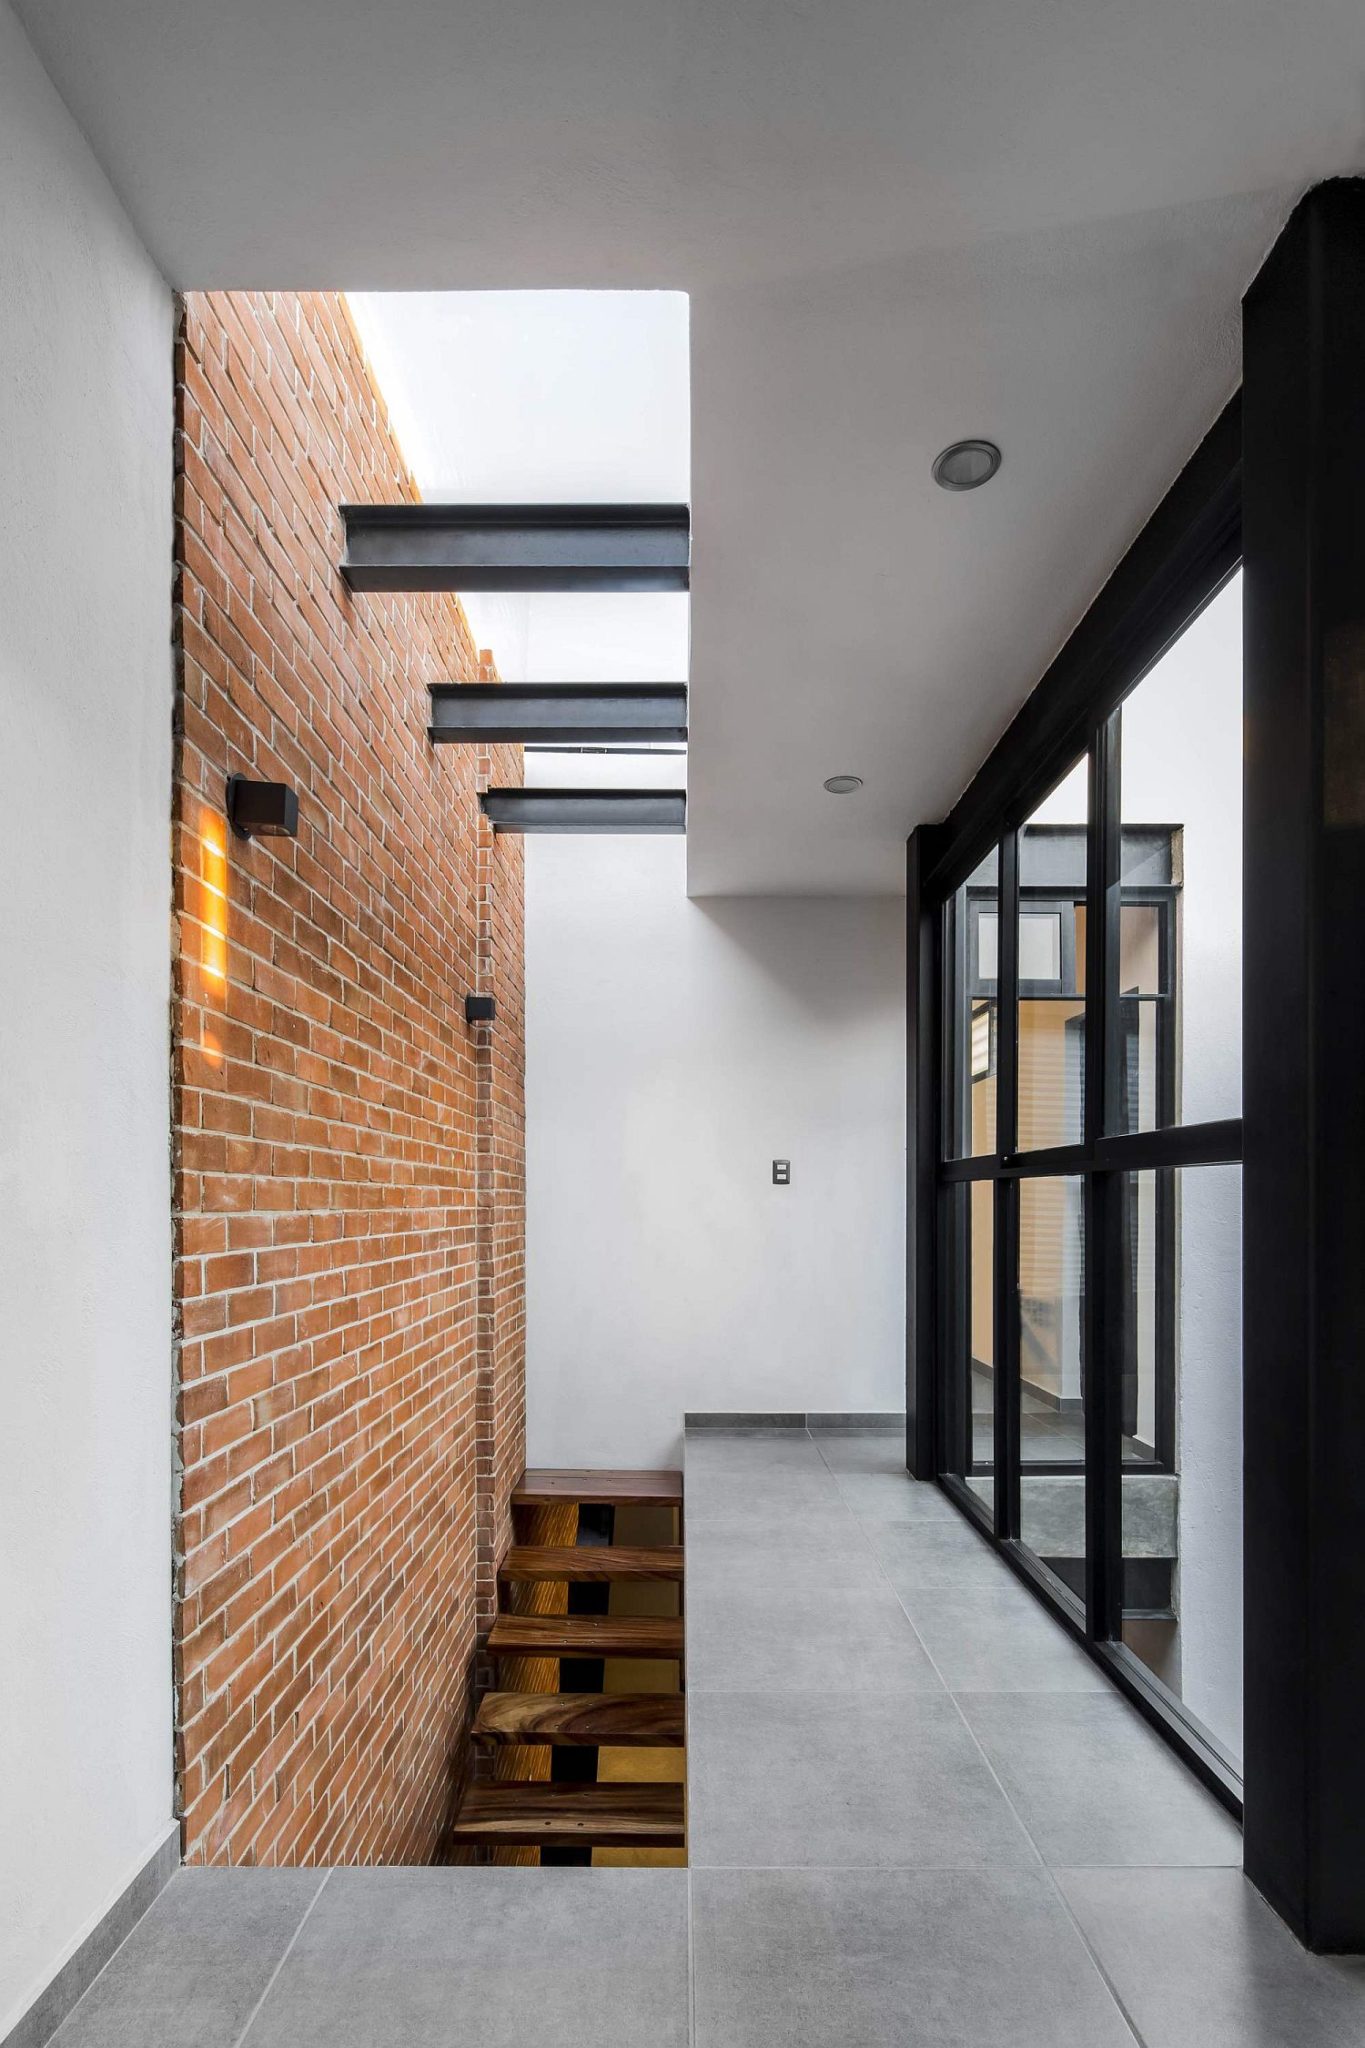 Stairwell and skylight bring natural light into the industrial modern home